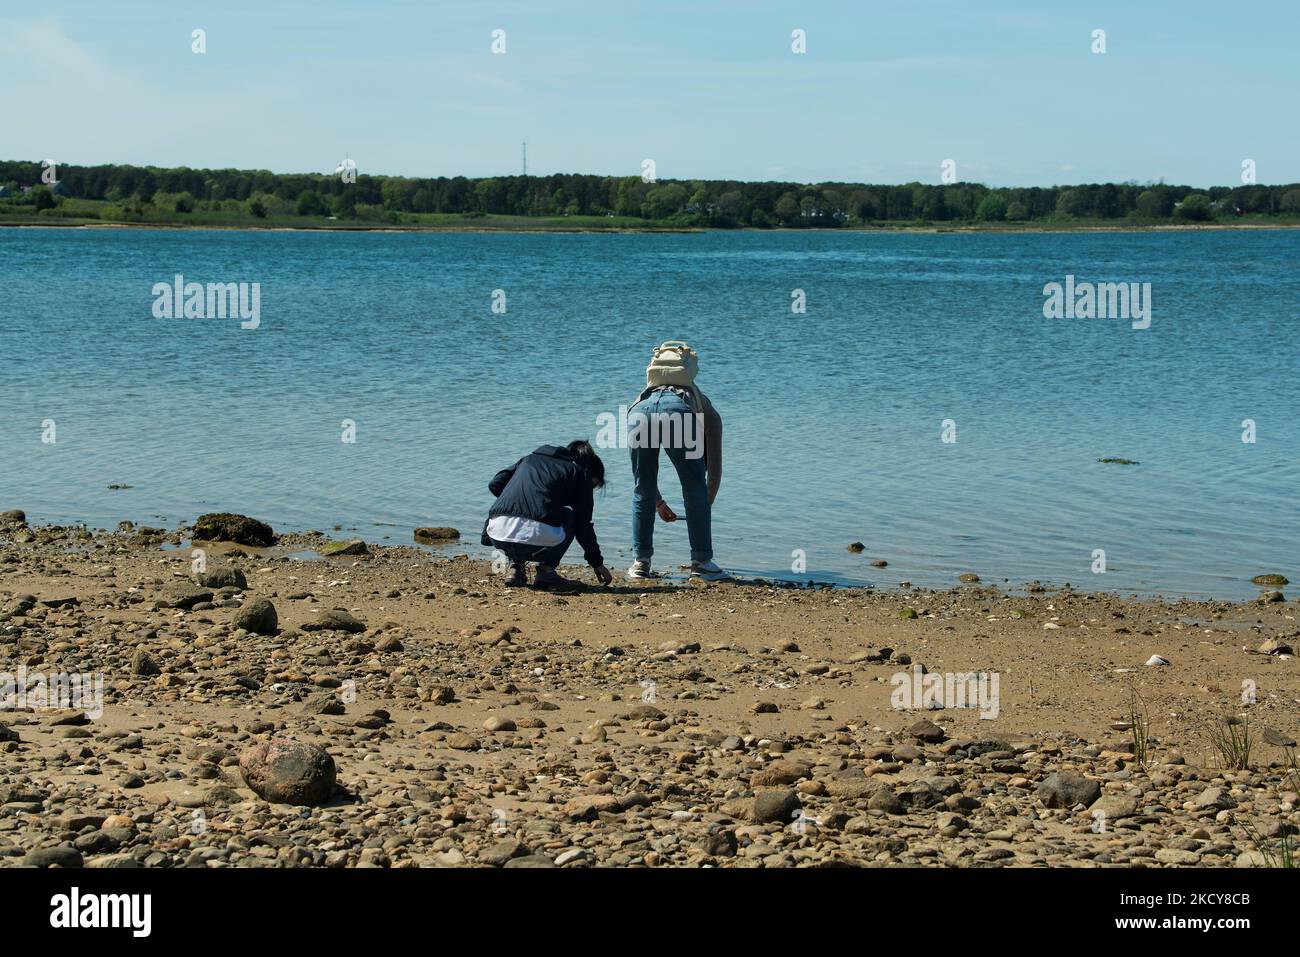 two women looking at shells and rocks at the waters edge in edgartown massachusetts on Martha's Vineyard. Stock Photo